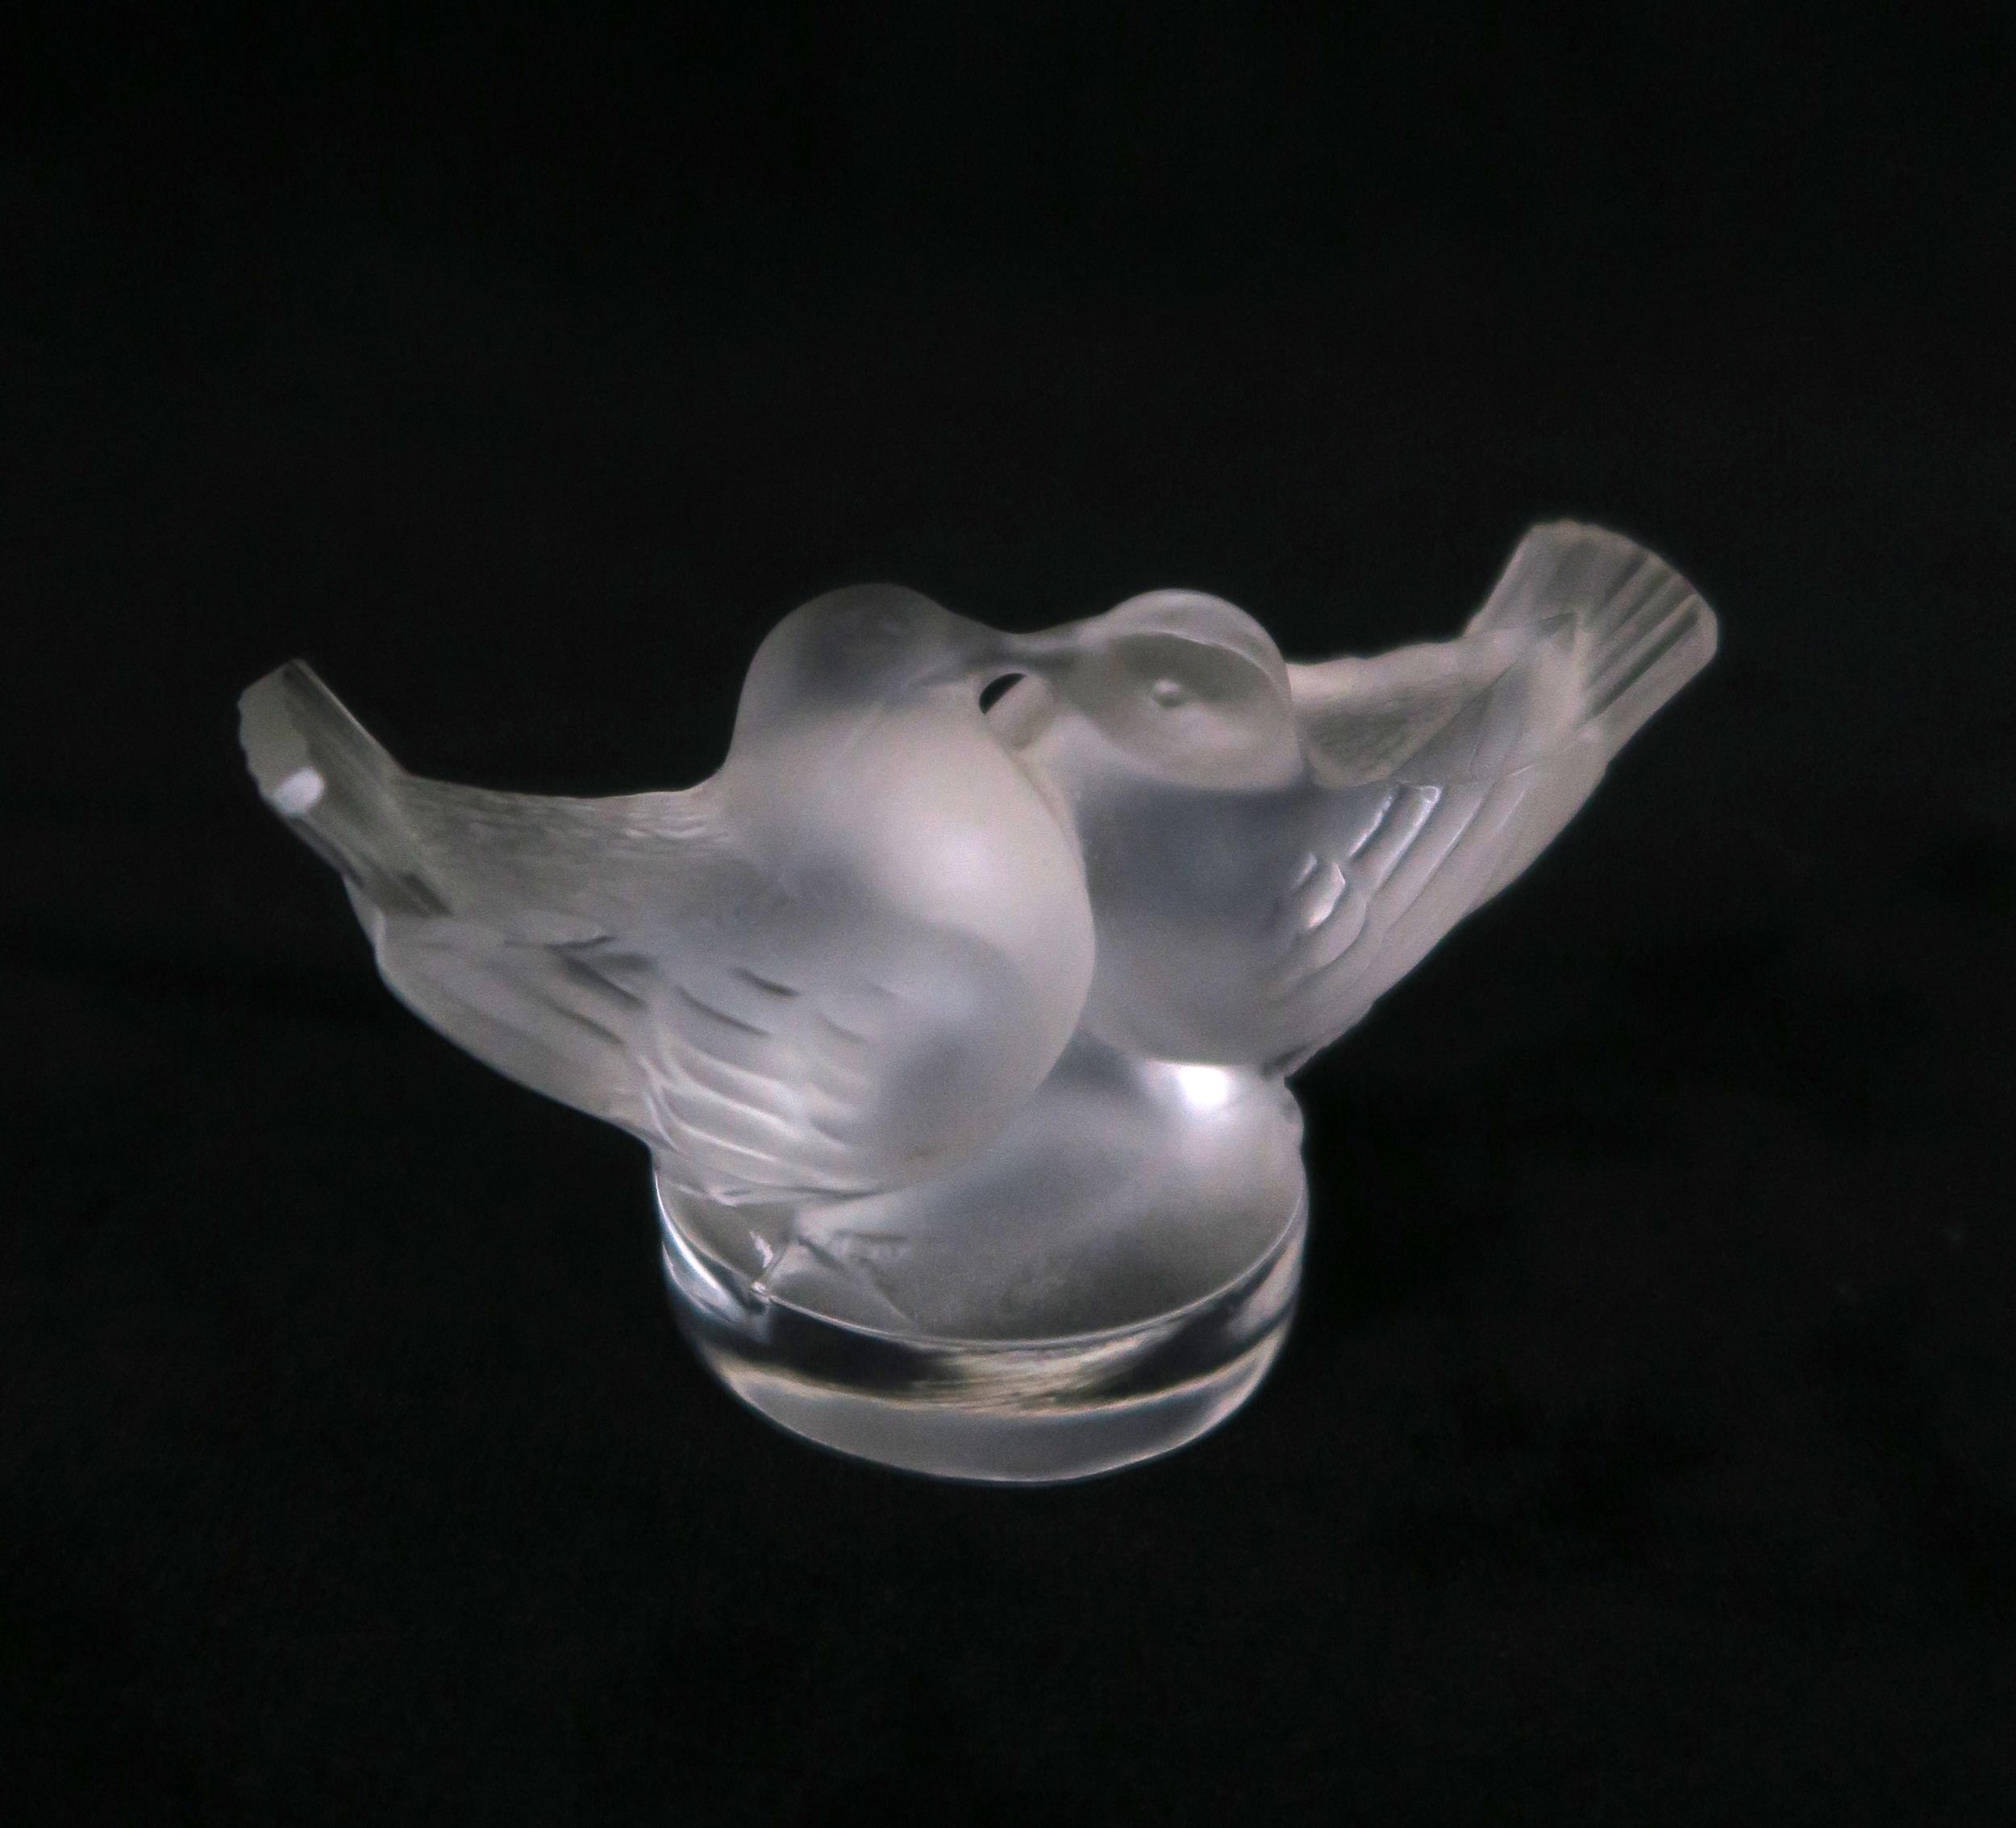 A PAIR OF LALIQUE BIRDS including Moineau Coquet and the other Moineau Moquer, 11cm long together - Image 4 of 5